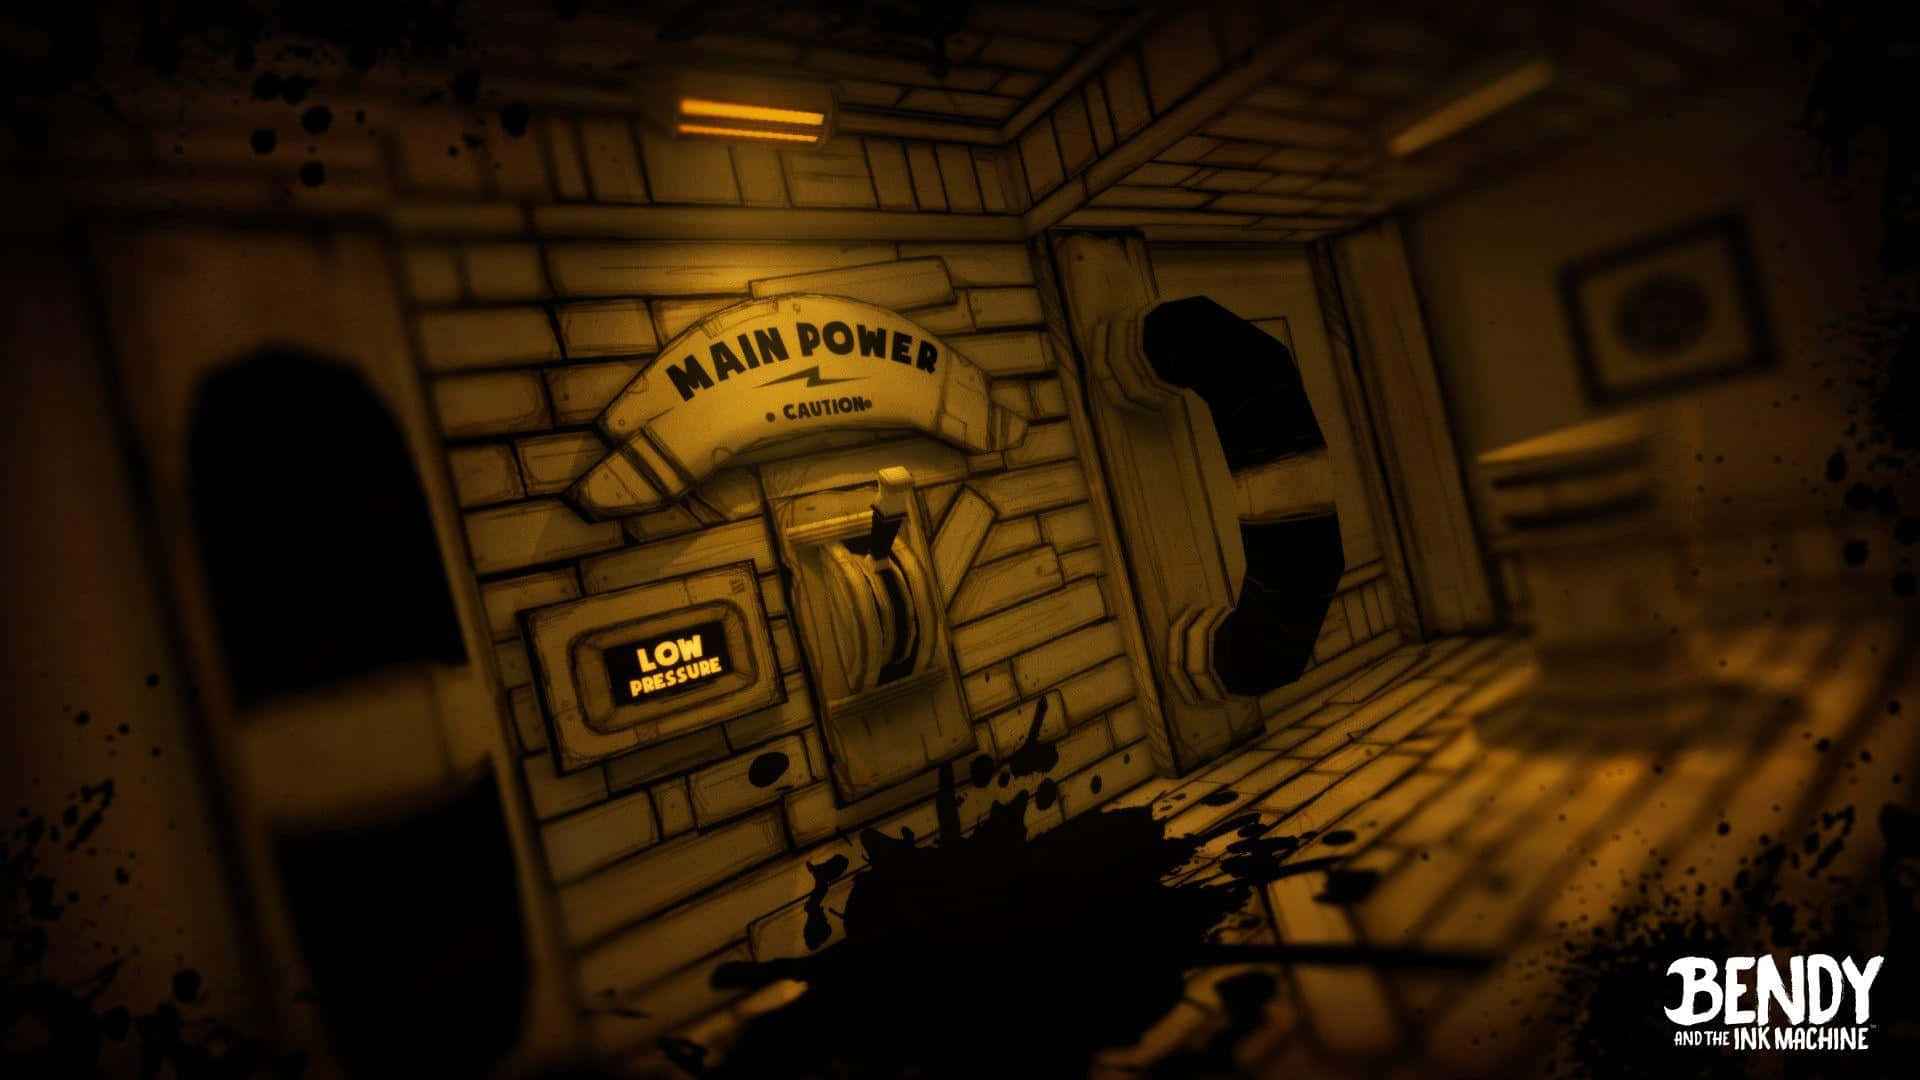 Bendy And The Ink Machine Room With In Blots Wallpaper